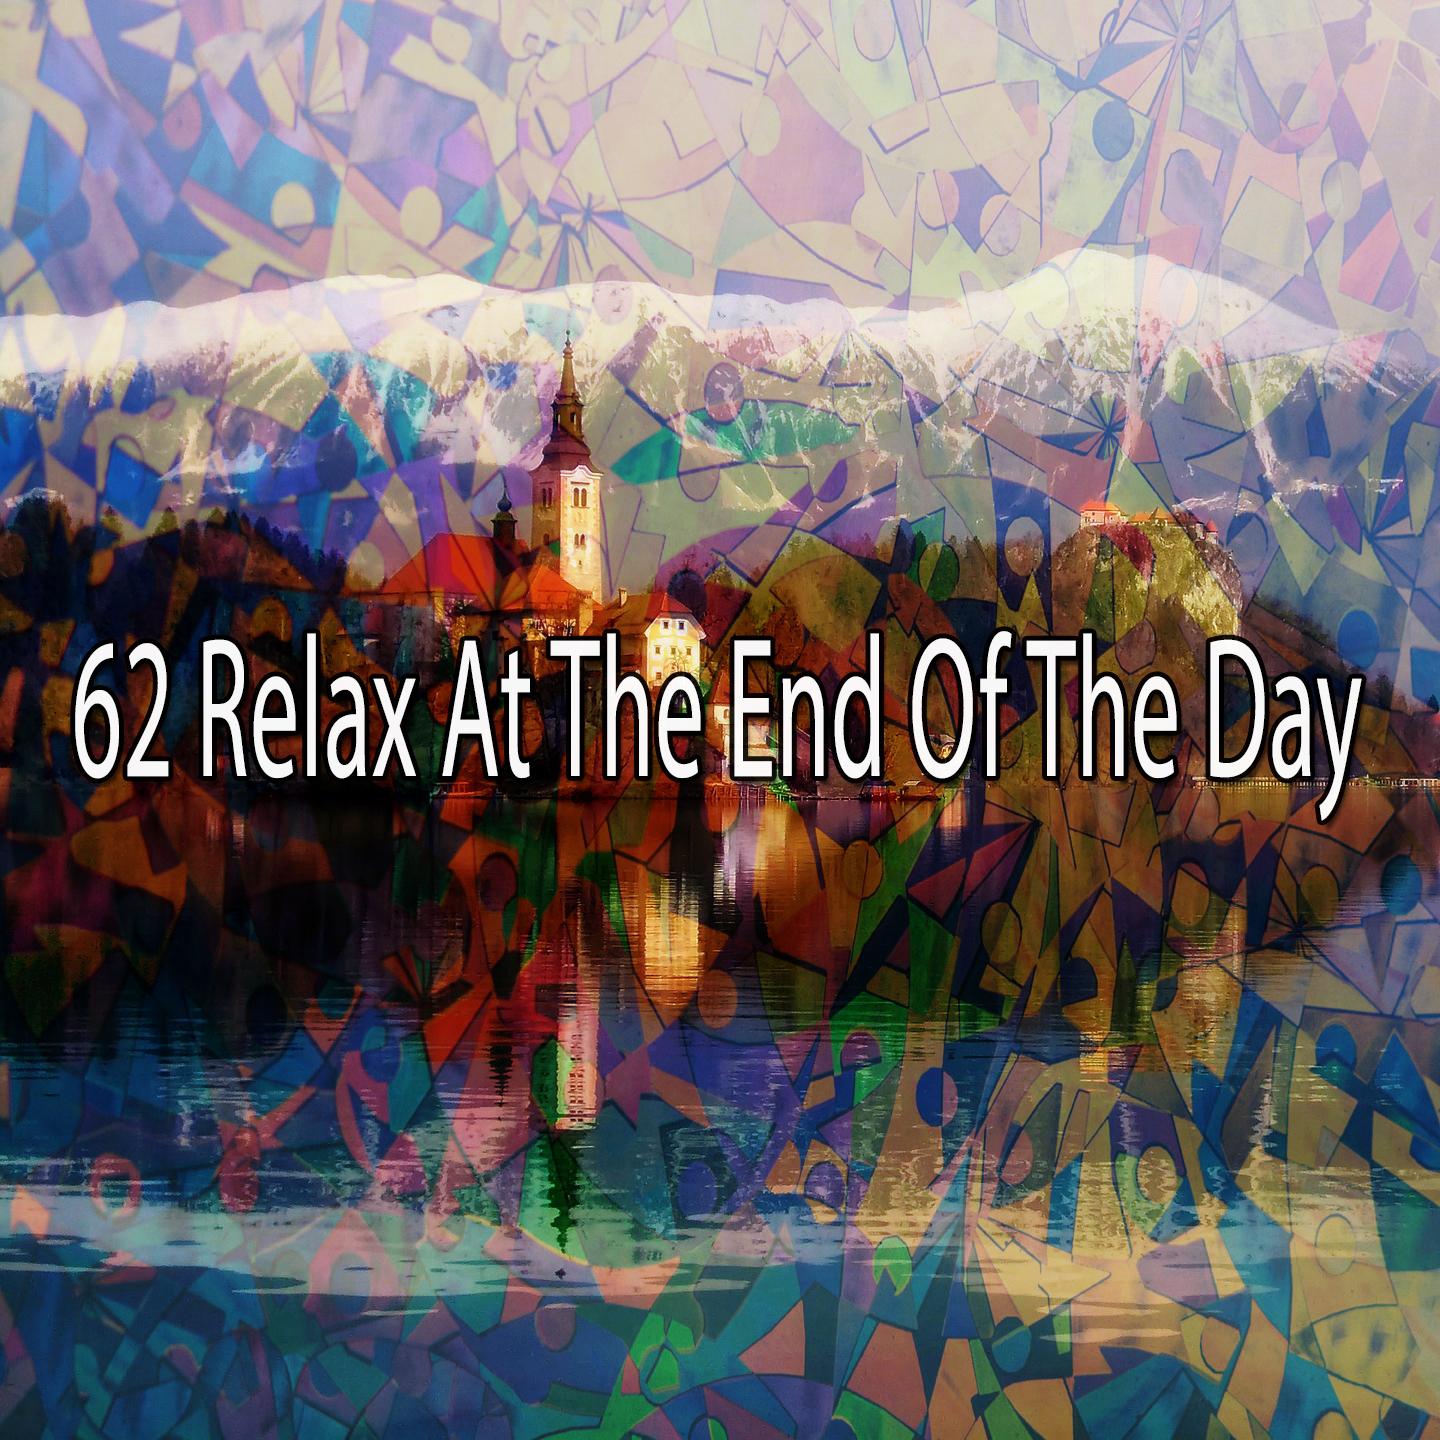 62 Relax at the End of the Day